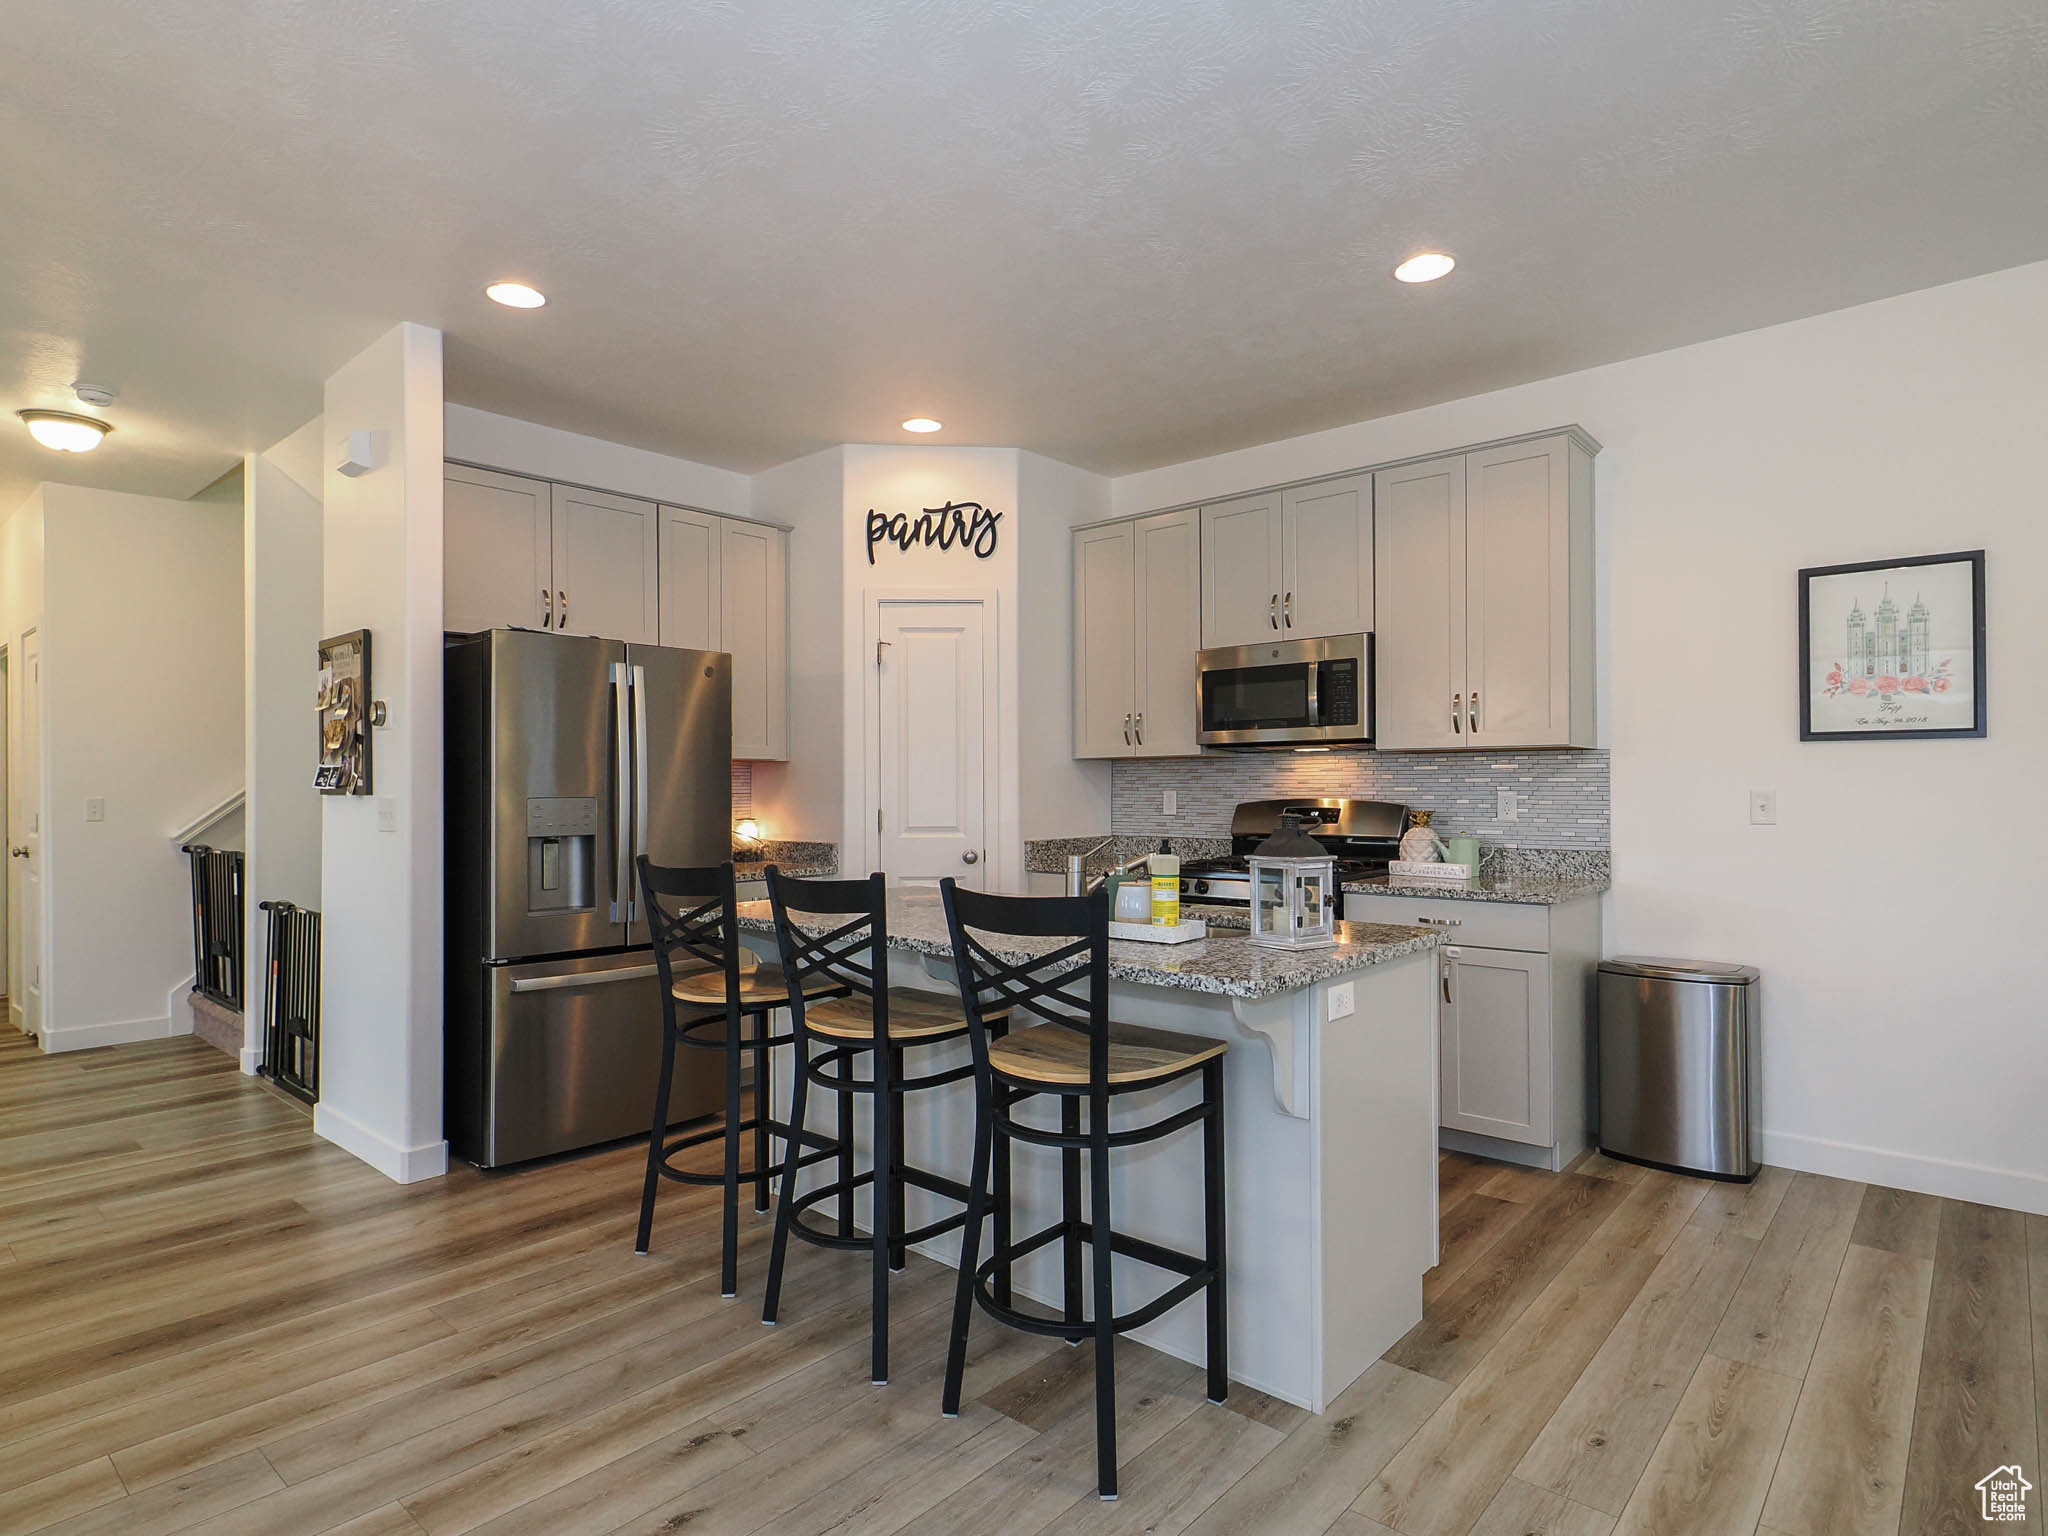 Kitchen with light hardwood / wood-style floors, gray cabinetry, stainless steel appliances, and a breakfast bar area